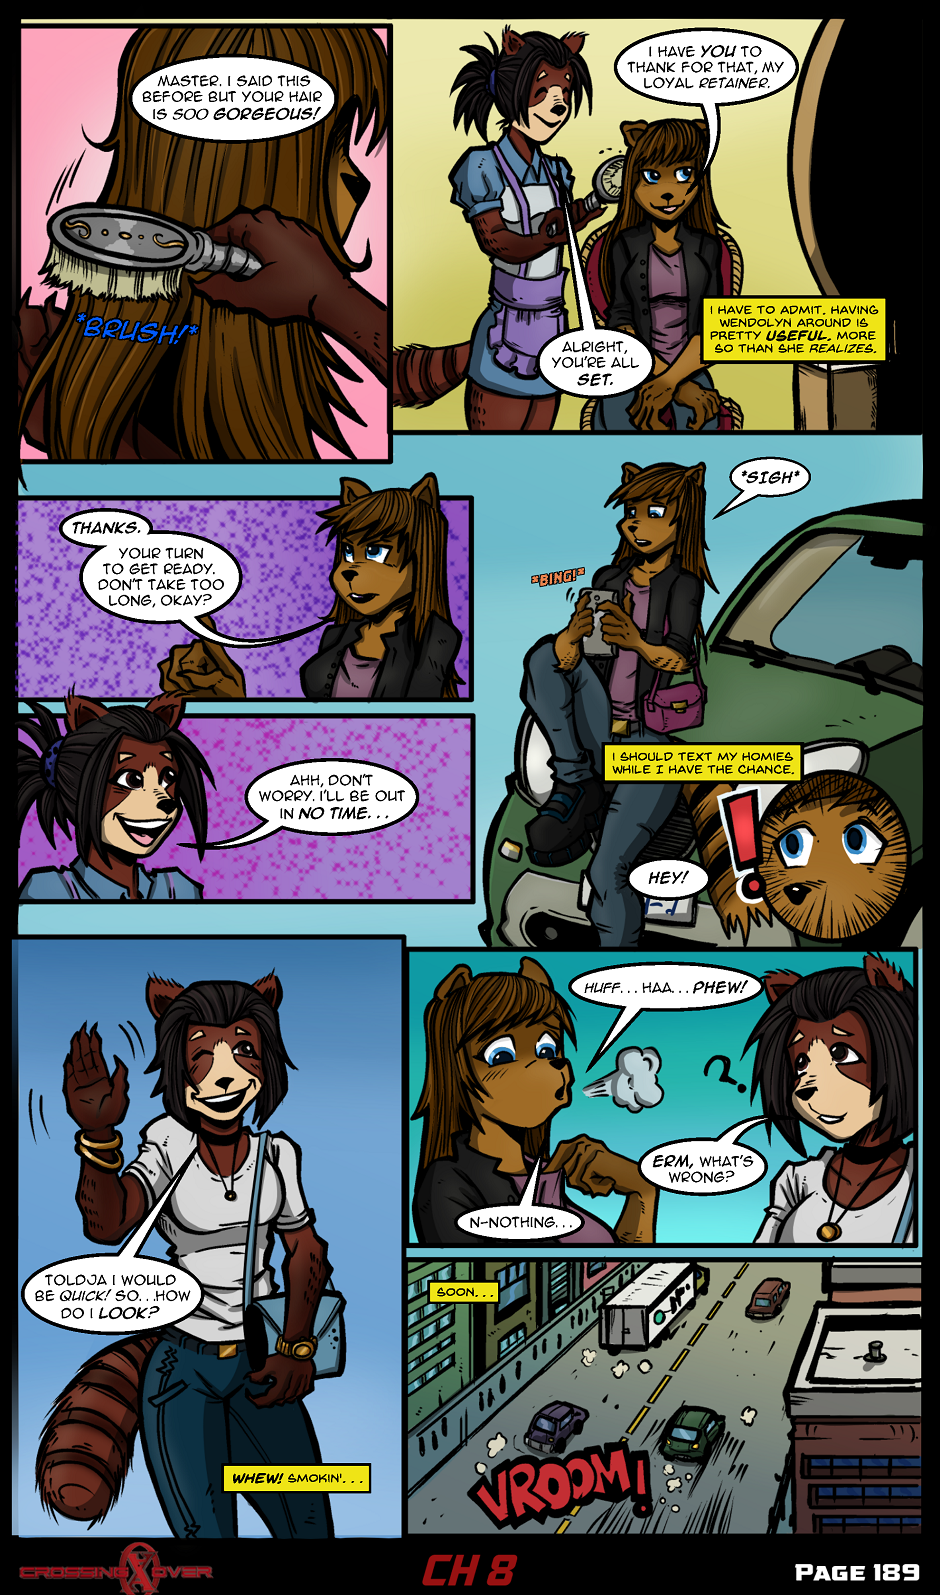 Page 189 (Ch 8)